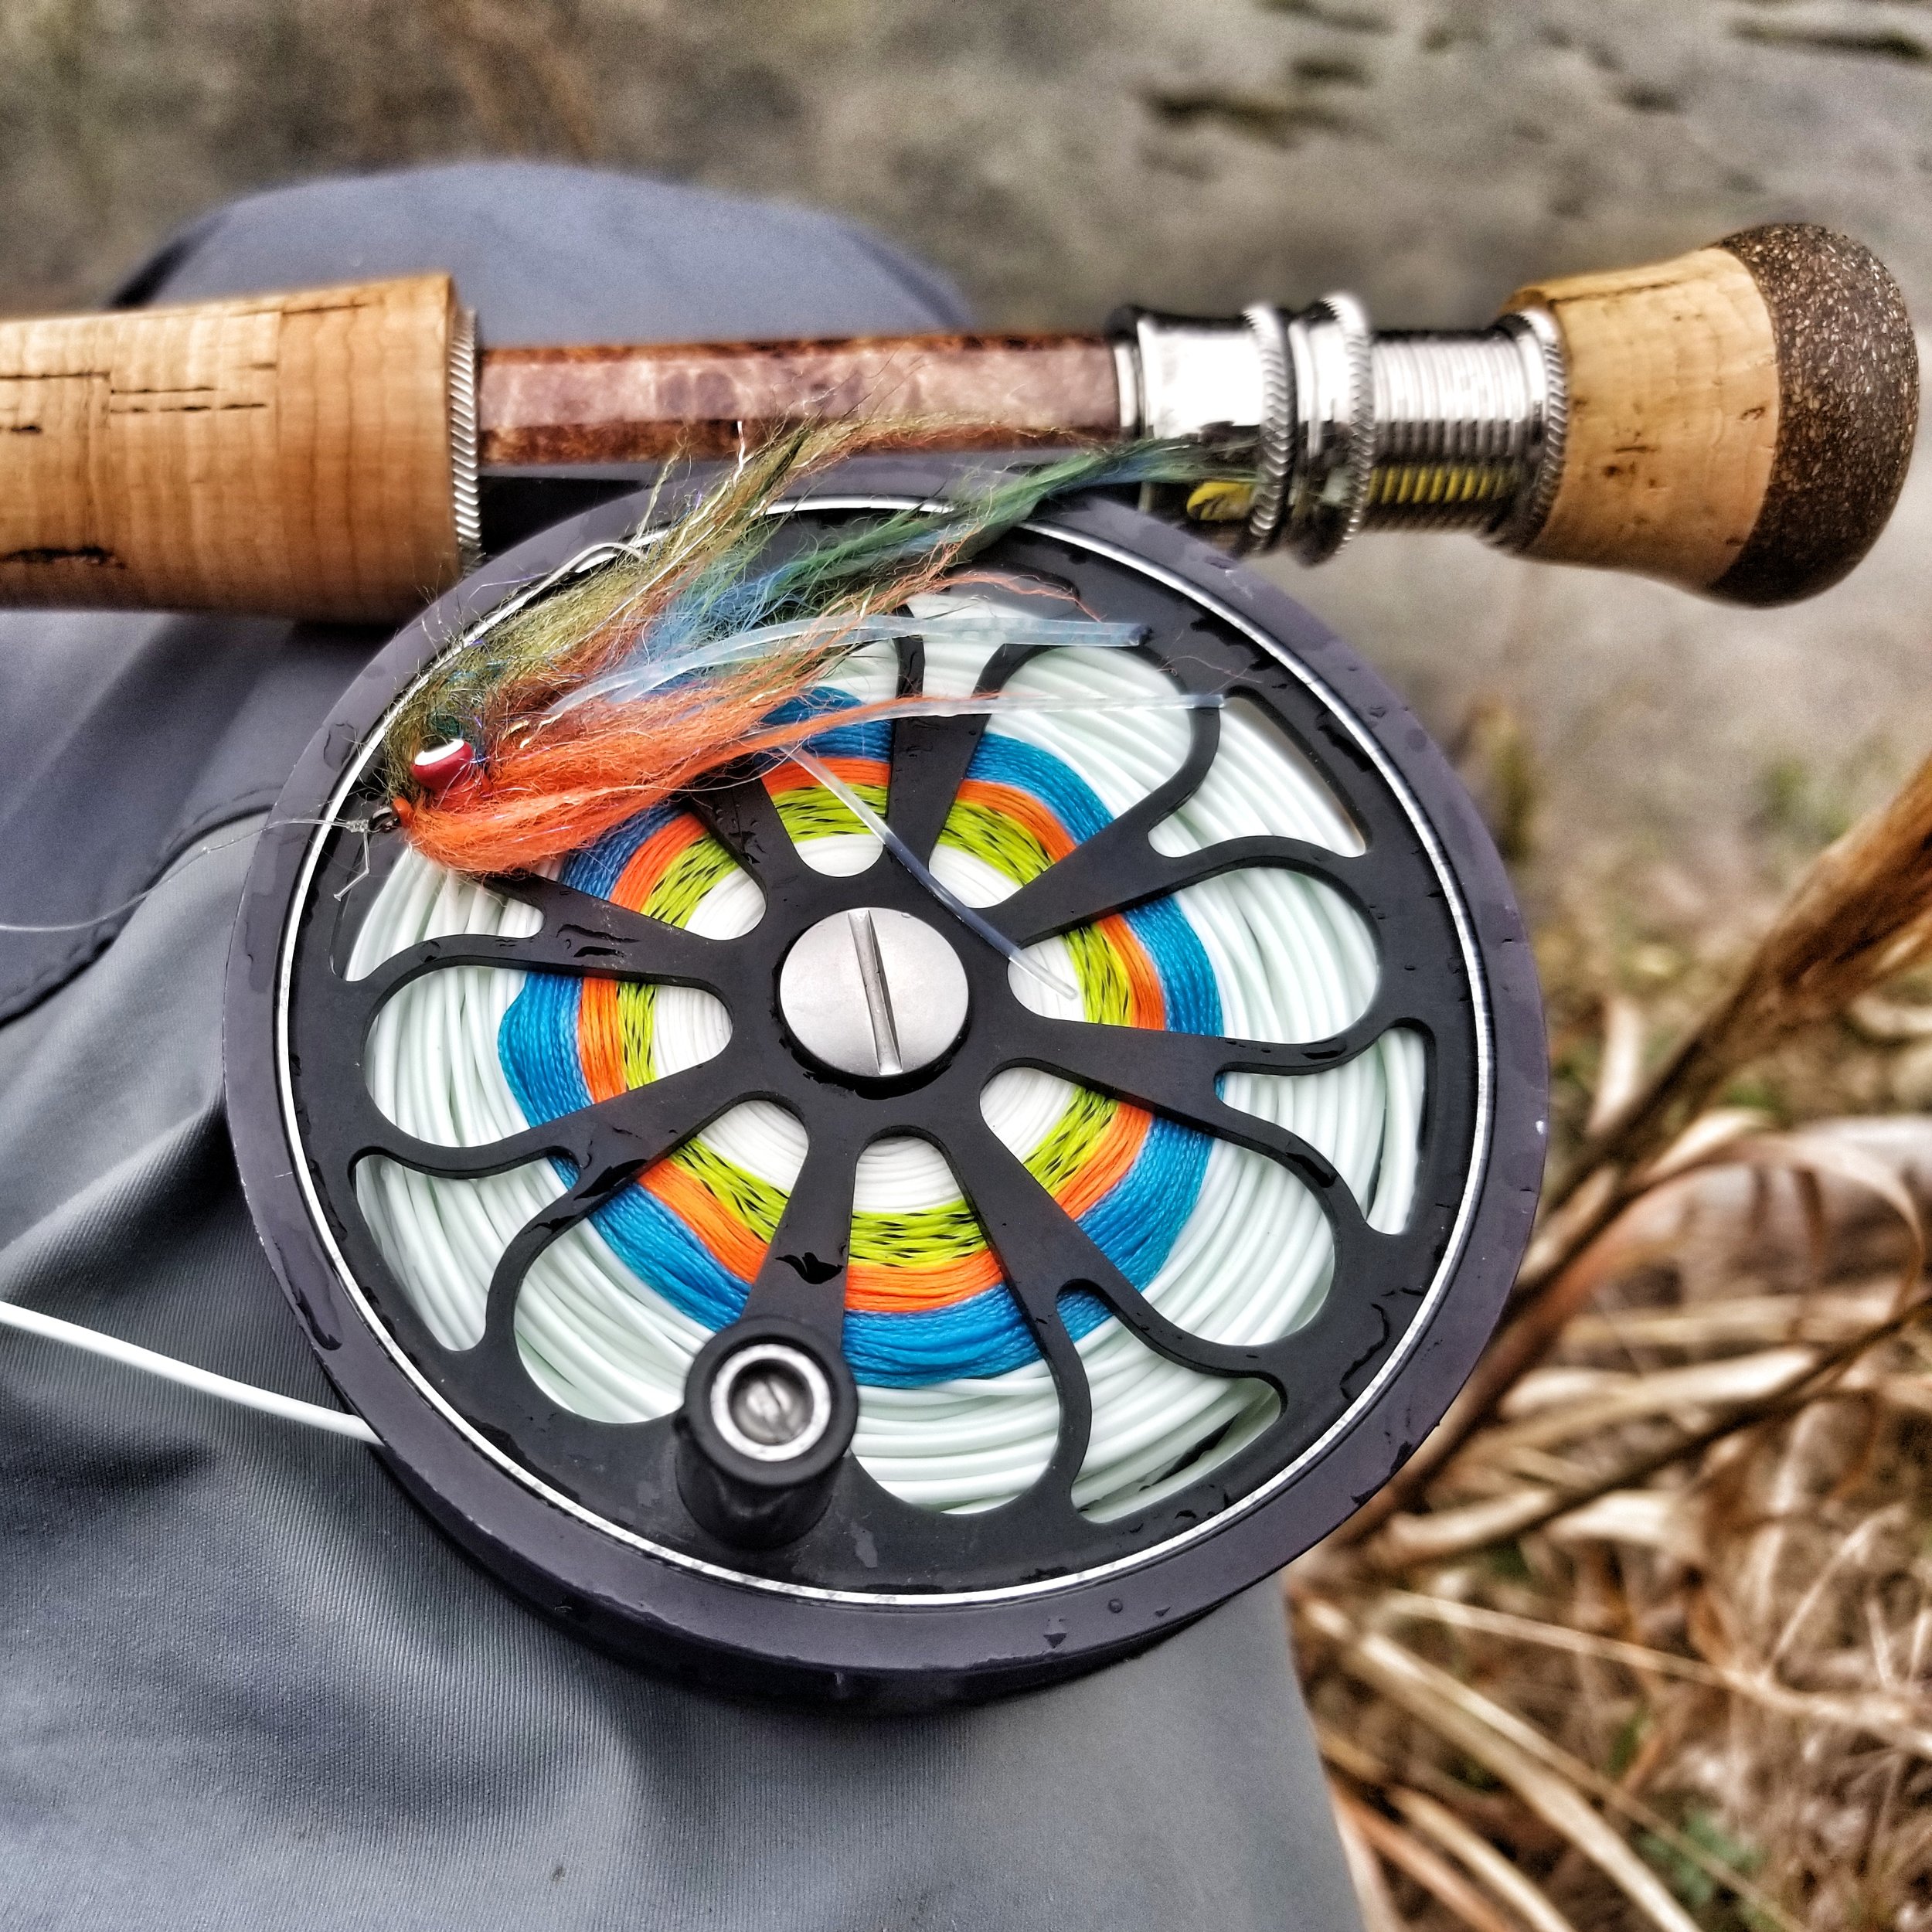 How Does A Conventional Fishing Reel Work  Fishing reels, Fly fishing  gear, Fly fishing for beginners